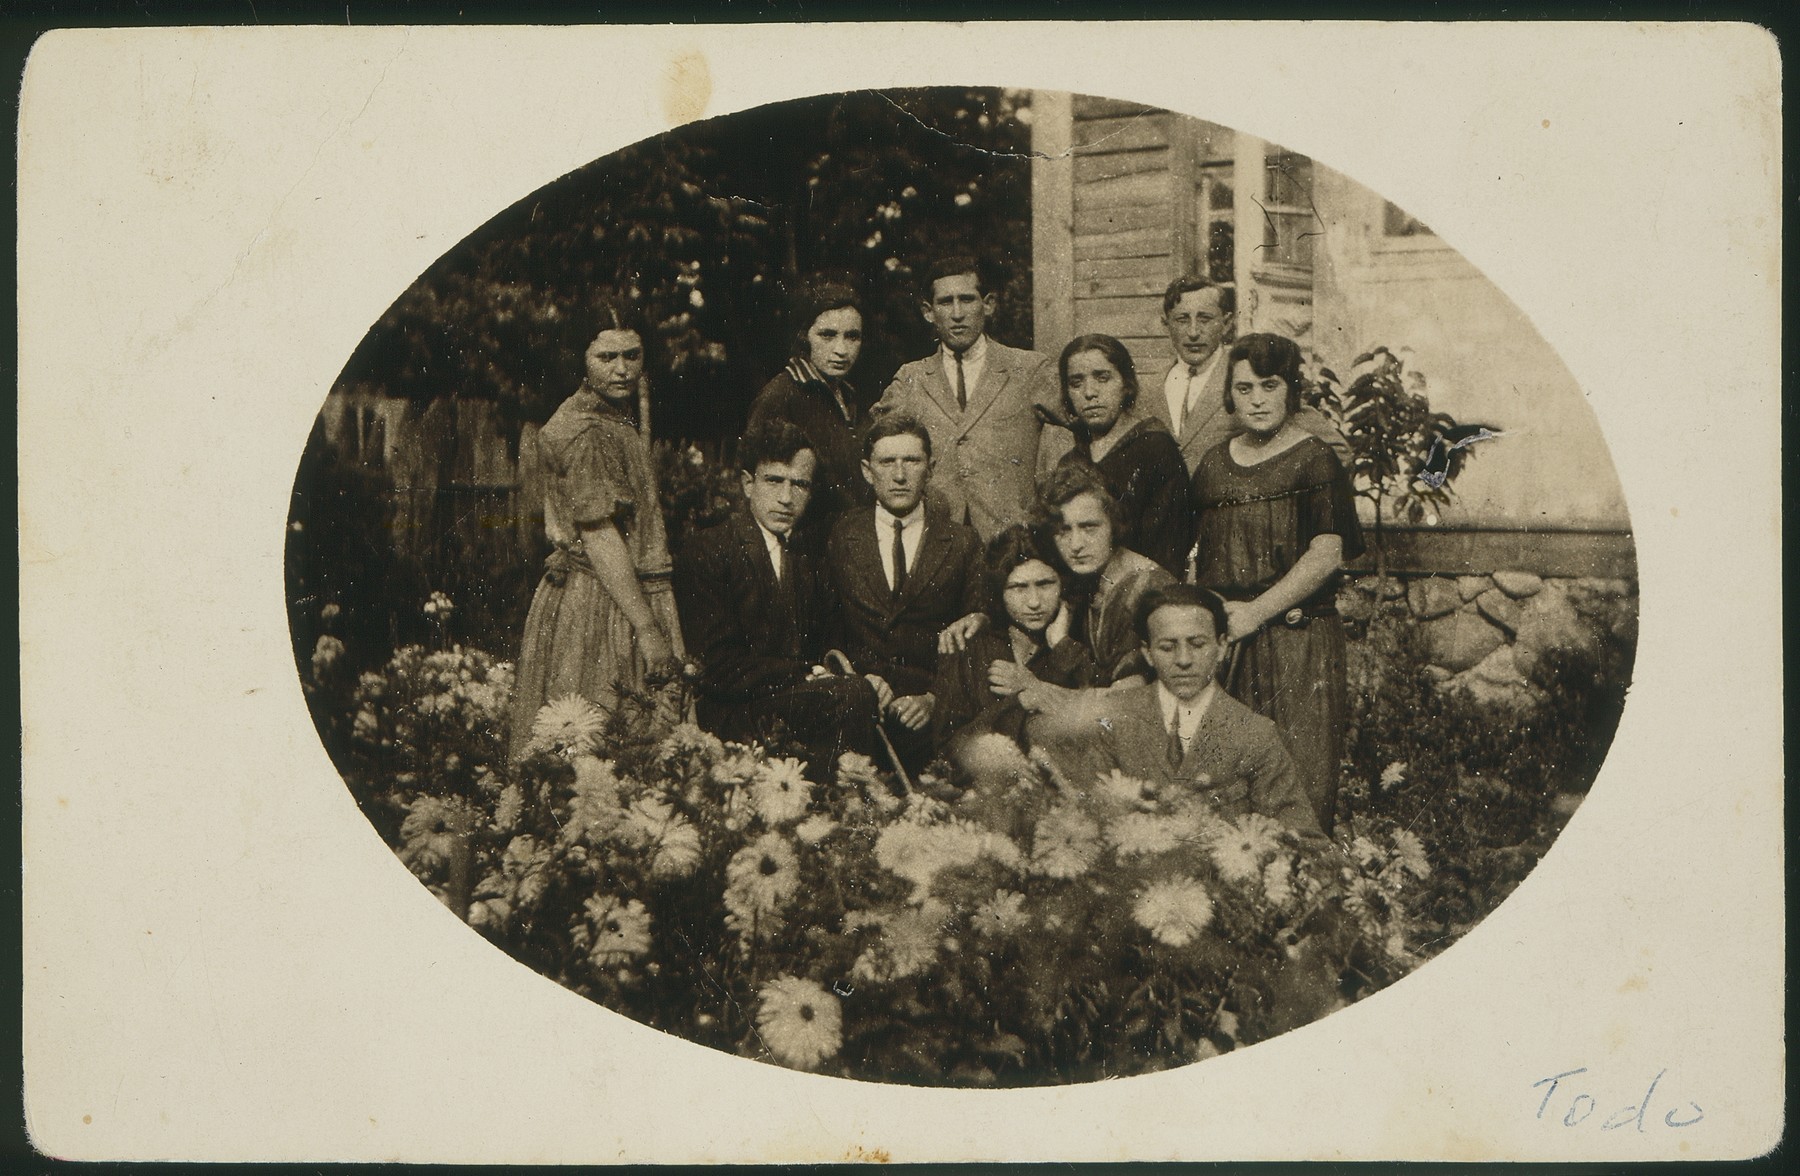 Dora Zlotnik Berkowicz gathers in a garden with friends in honor of some of their forthcoming immigration to Palestine.

The photo is inscriberd with the following words:  "The last minutes in Vasilishok.  Not always are words sufficient."  Dora also immigrated to Palestine a few years later.